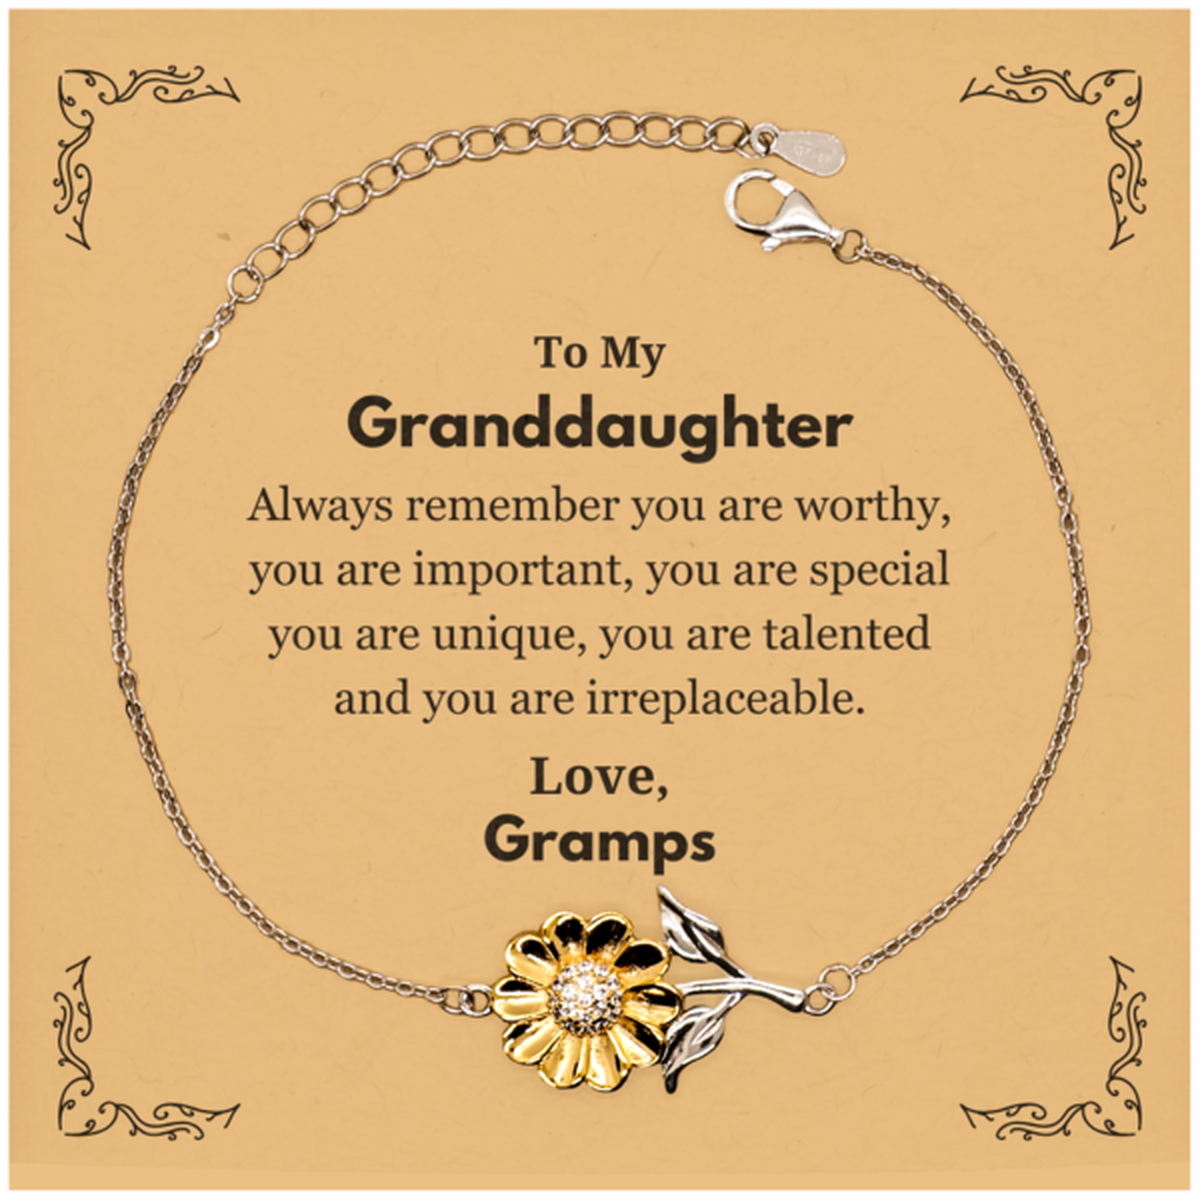 Granddaughter Birthday Gifts from Gramps, Inspirational Sunflower Bracelet for Granddaughter Christmas Graduation Gifts for Granddaughter Always remember you are worthy, you are important. Love, Gramps